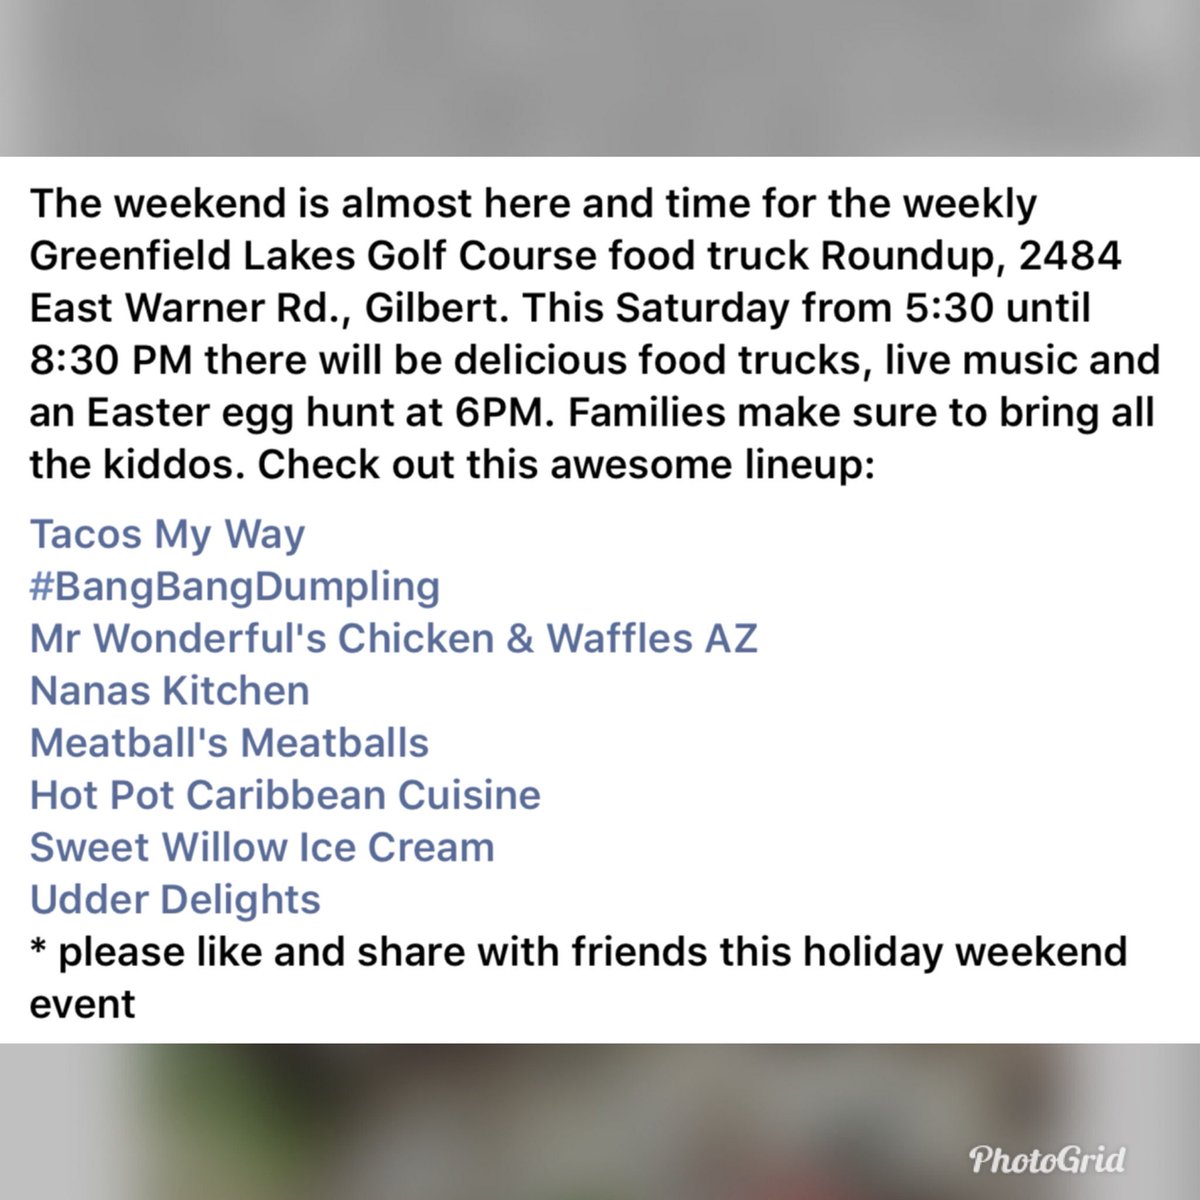 Join me and a few of my food truck friends this Saturday from 5:30-8:30 at Greenfield Lakes Golf Course Food Truck Roundup! #azgourmet #thisweekend #easteregghunt #mwcwaz #foodtruckroundup #greenfieldgolfcourse